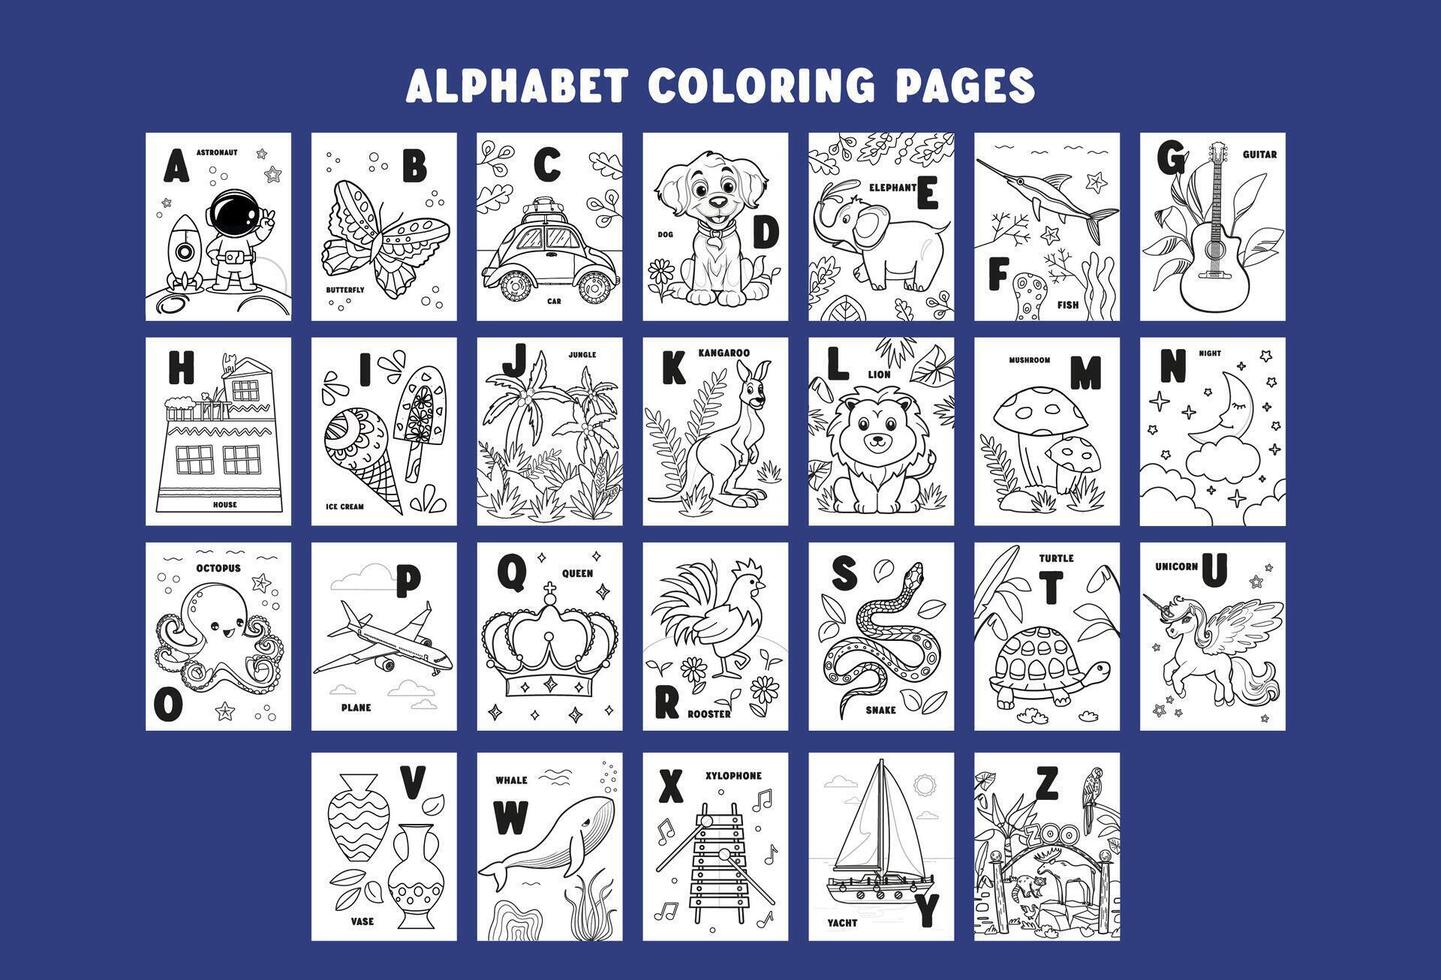 Alphabet Coloring book. ABC Hand drawn coloring for kids with animals. Beautiful simple drawings with patterns. Coloring book pictures. Preschool, kindergarten education. Children activities sheets vector